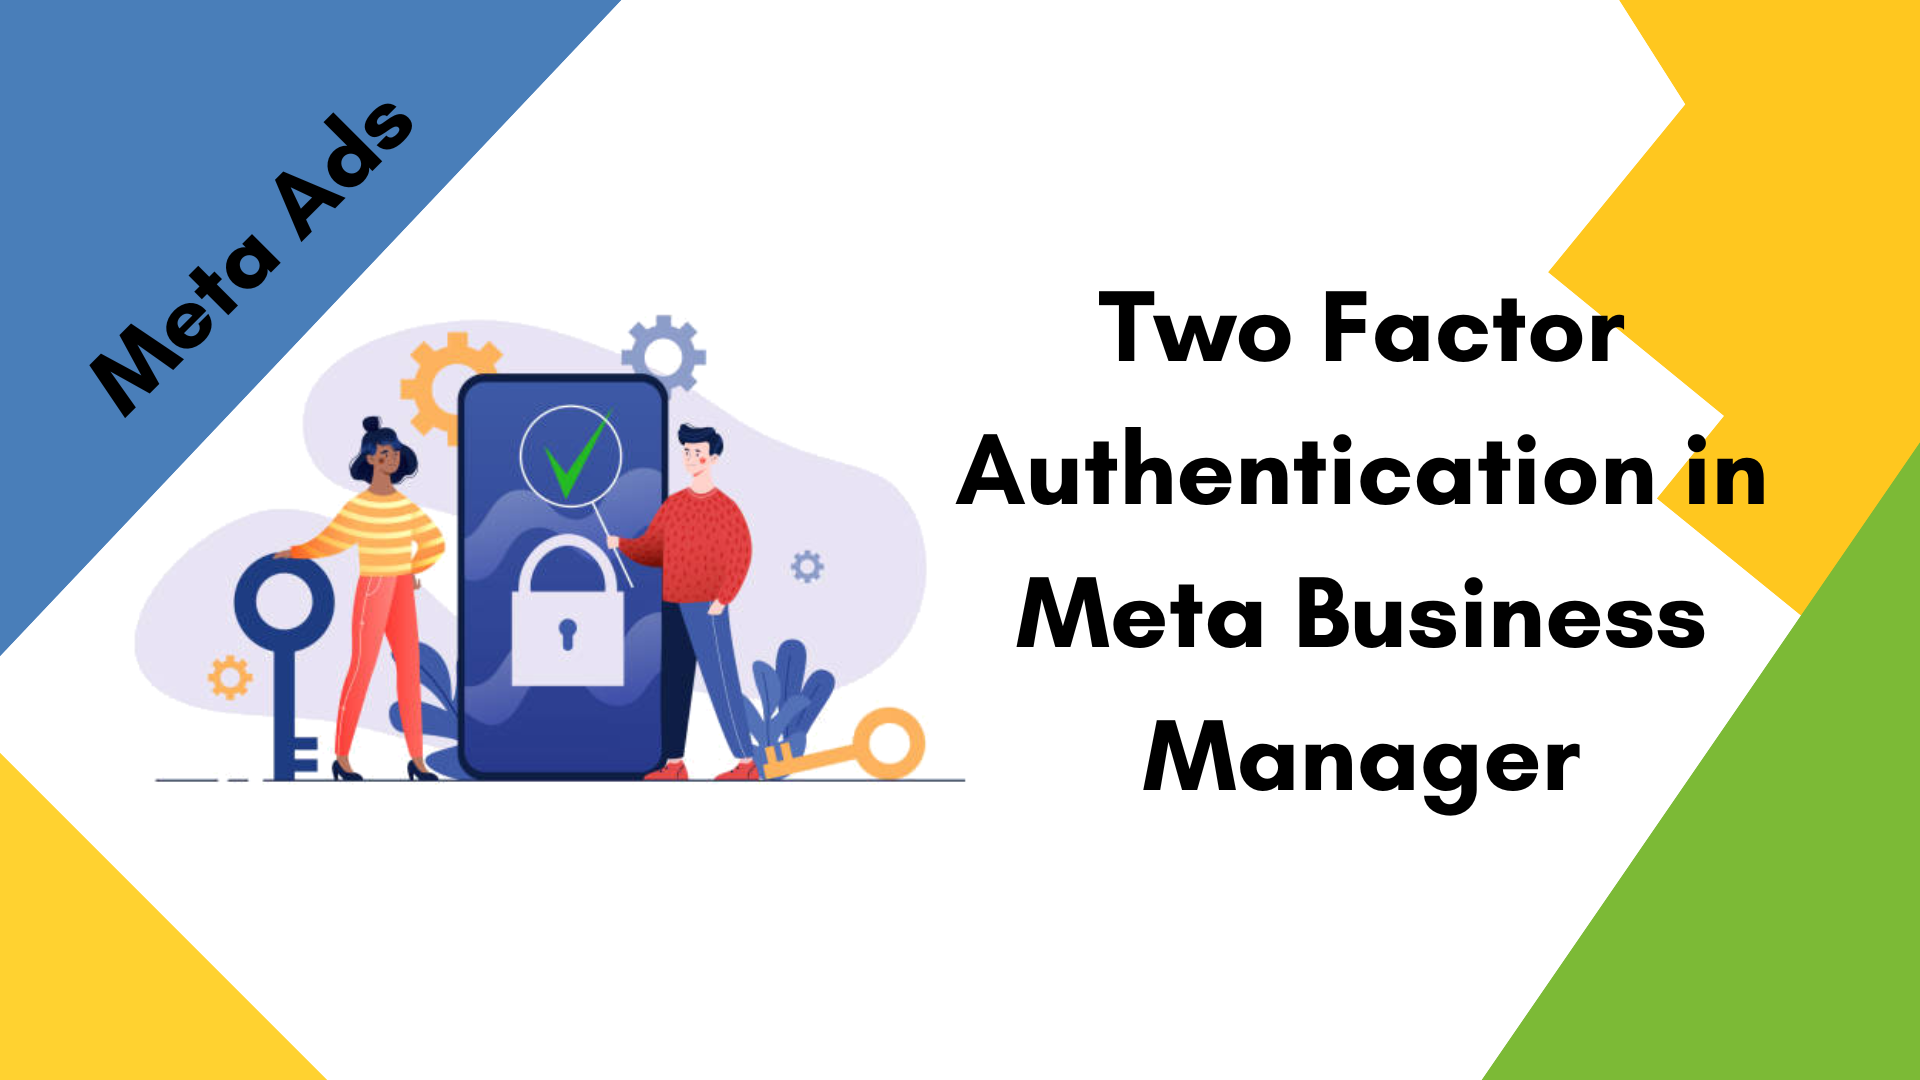 Why You Need to Use Two Factor Authentication in Meta Business Manager